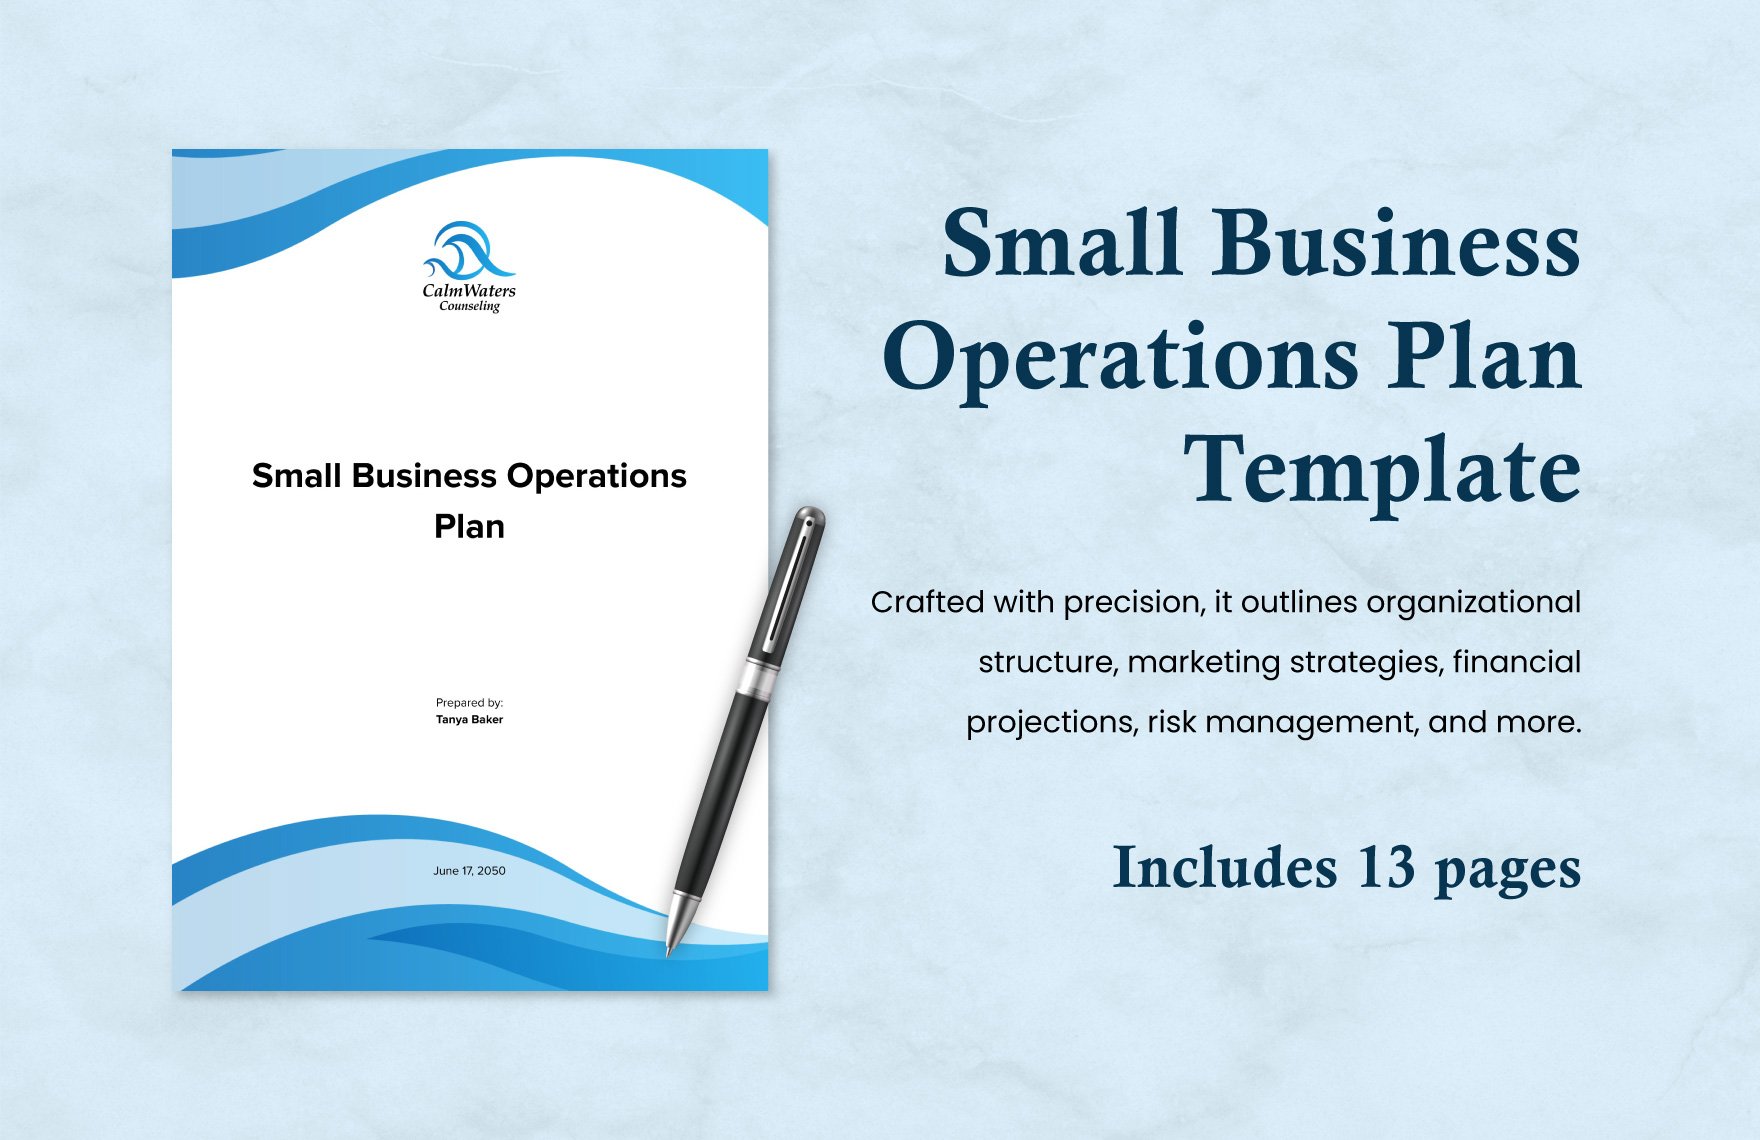 Small Business Operations Plan Template